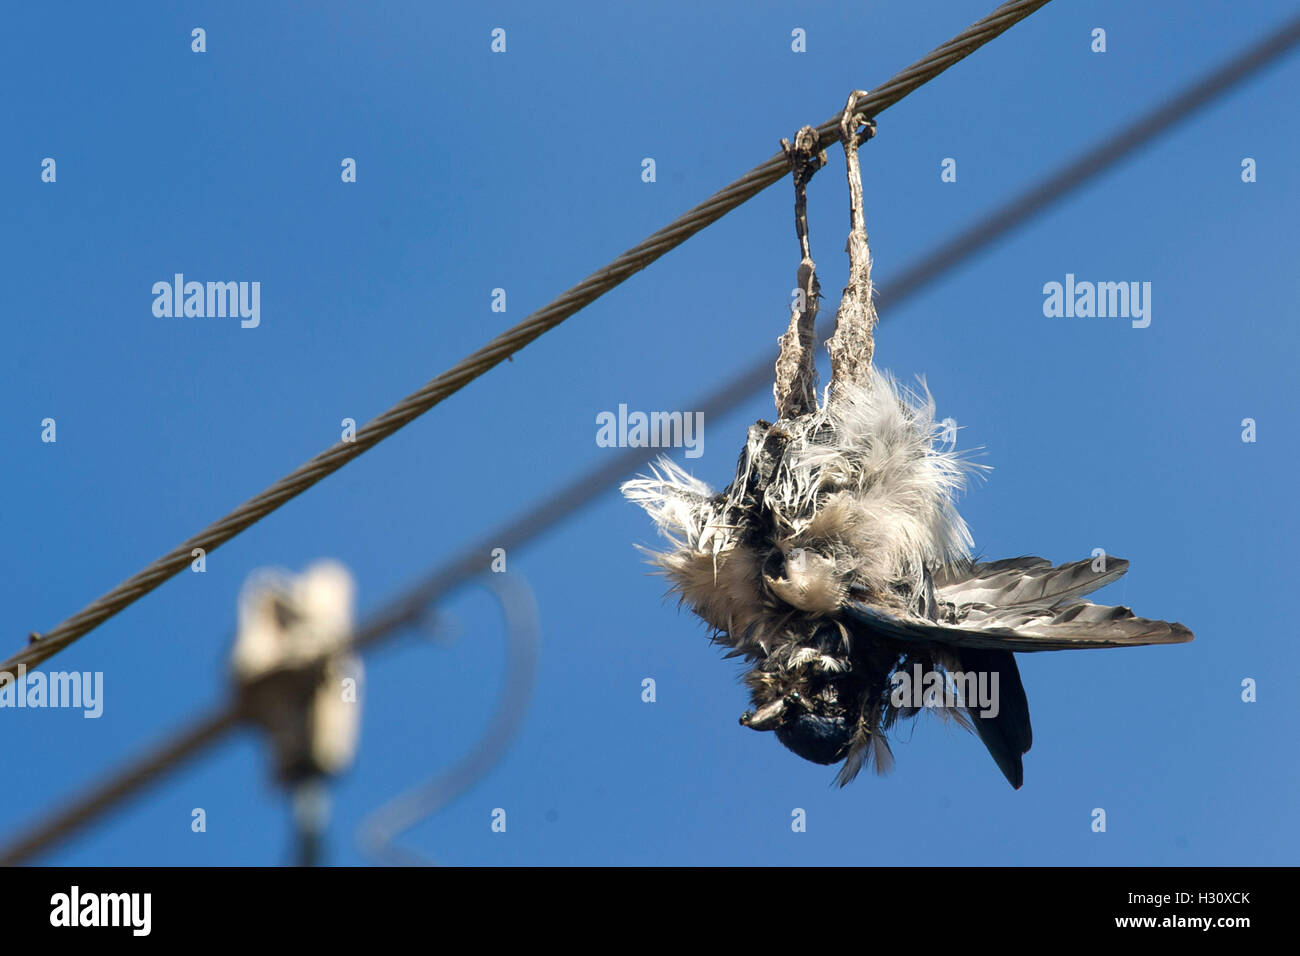 Elkton, Oregon, USA. 2nd Oct, 2016. A dead Steller's jay hangs upside down from a power line near Elkton in southwestern Oregon. The bird may have been electrocuted while perching on the power line. © Robin Loznak/ZUMA Wire/Alamy Live News Stock Photo